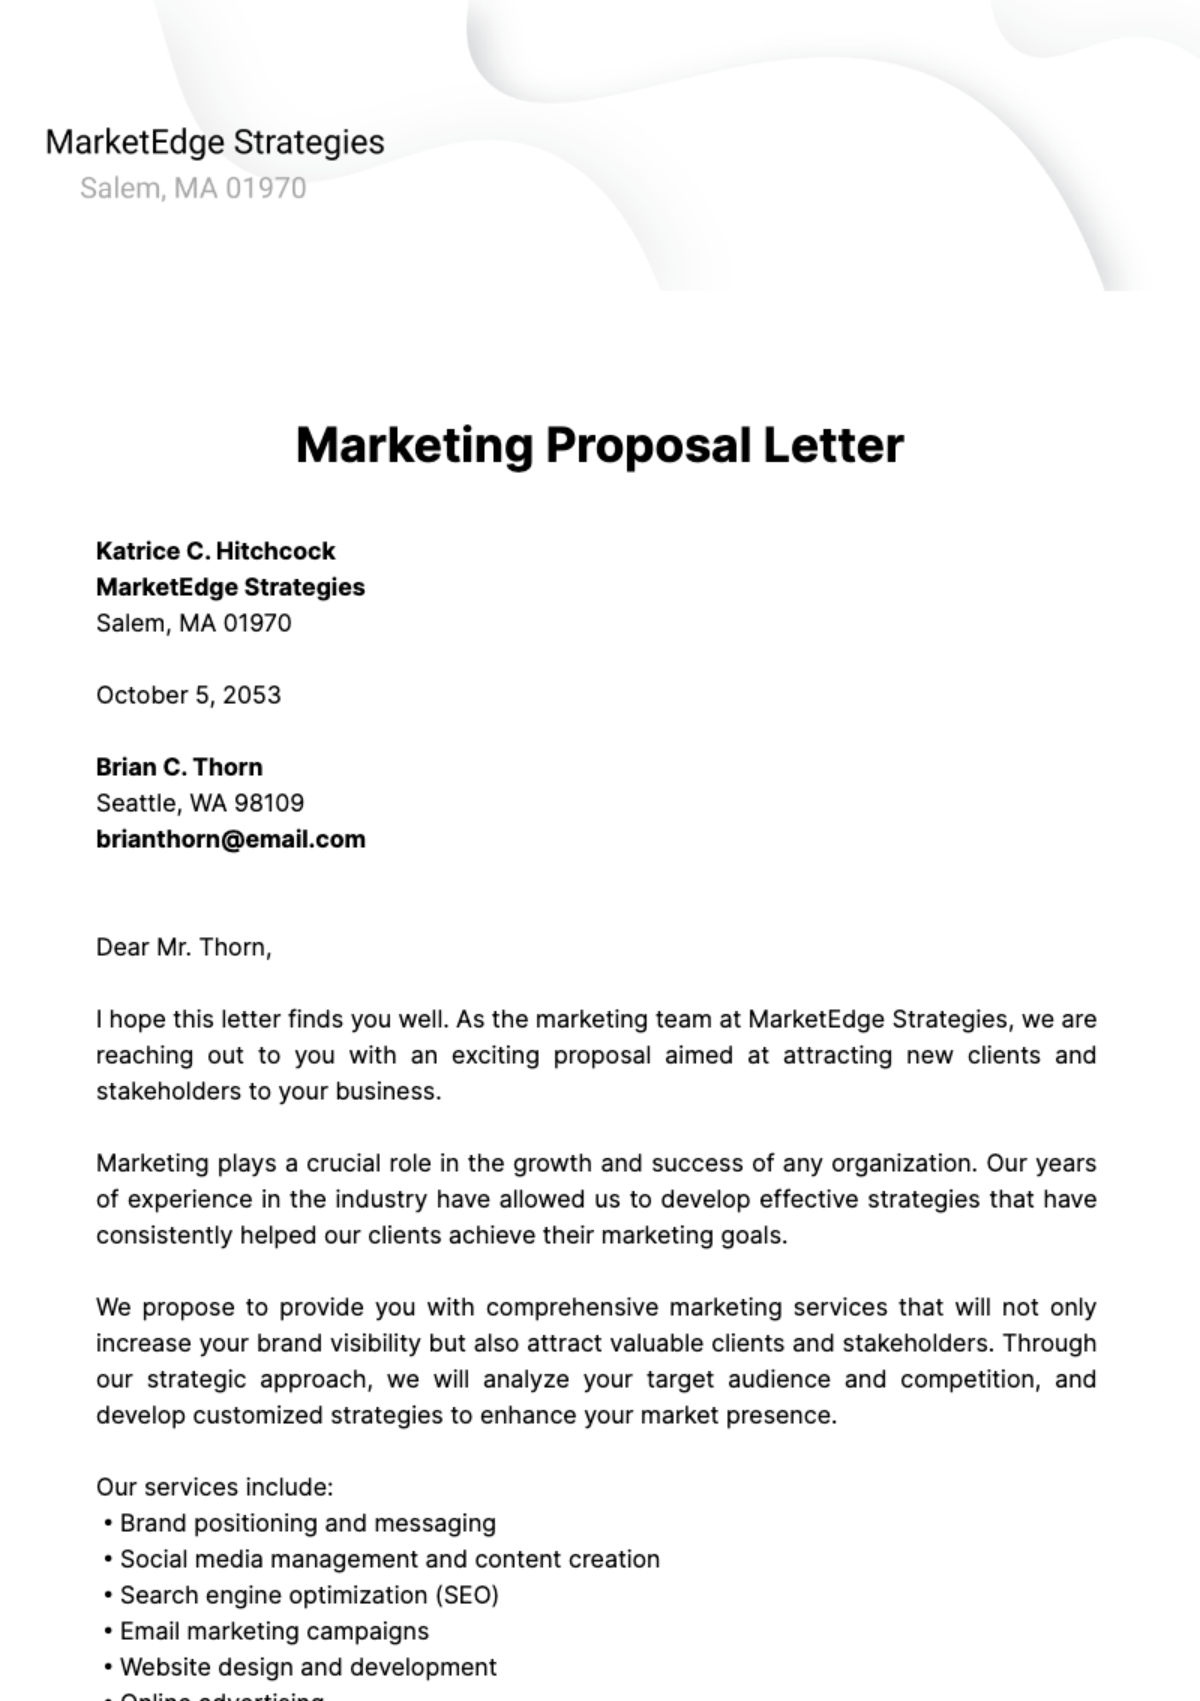 Marketing Proposal Letter Template